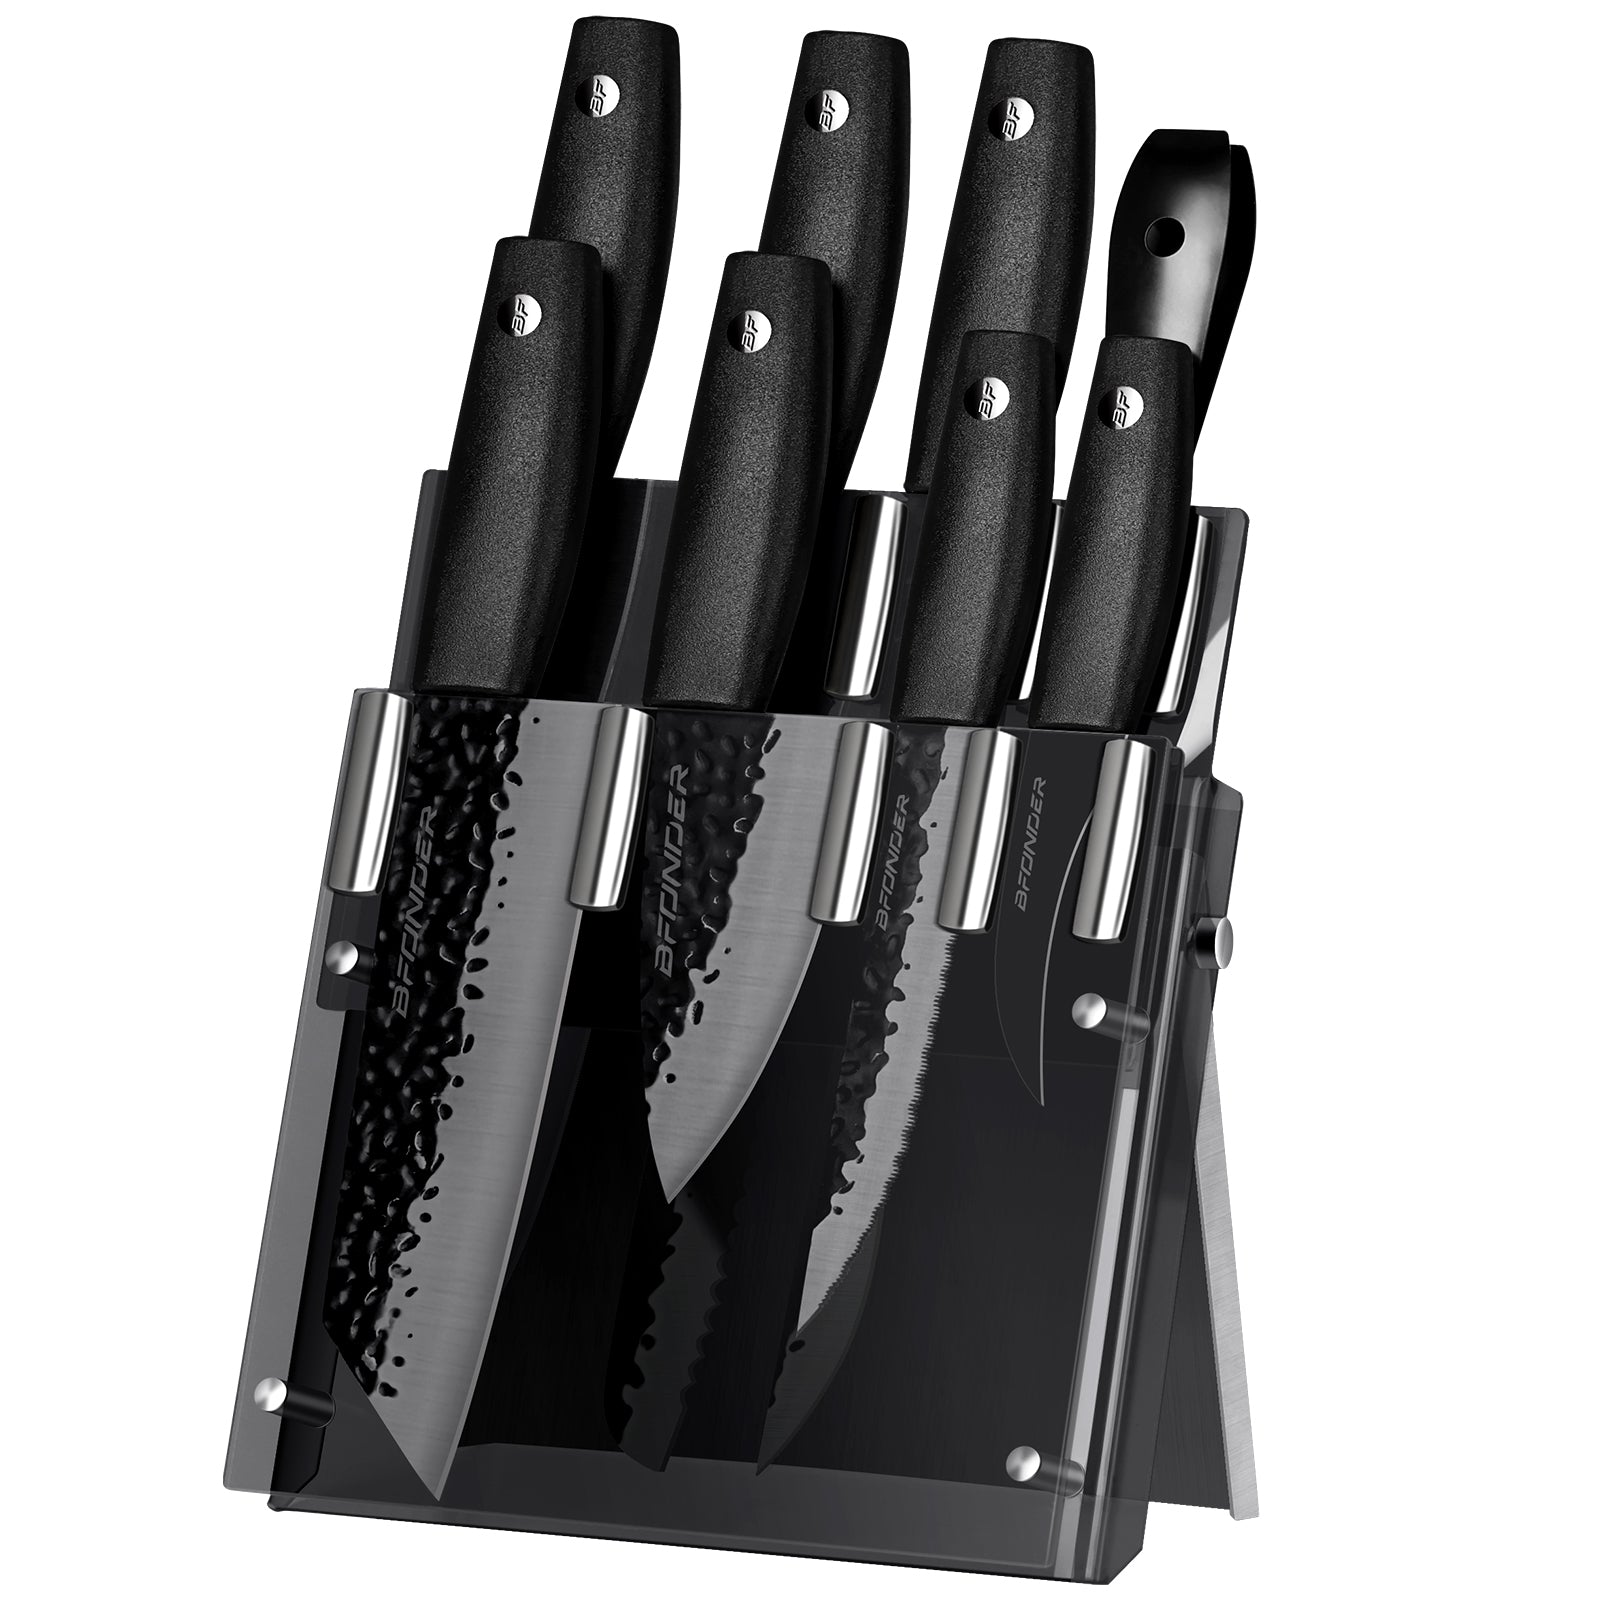 Bfonder Kitchen Knife Set with Wooden Box, 4PCS Professional Chef Knife Set  for Bread Garnishing, High Carbon Stainless Steel Japanese Knife Sets with